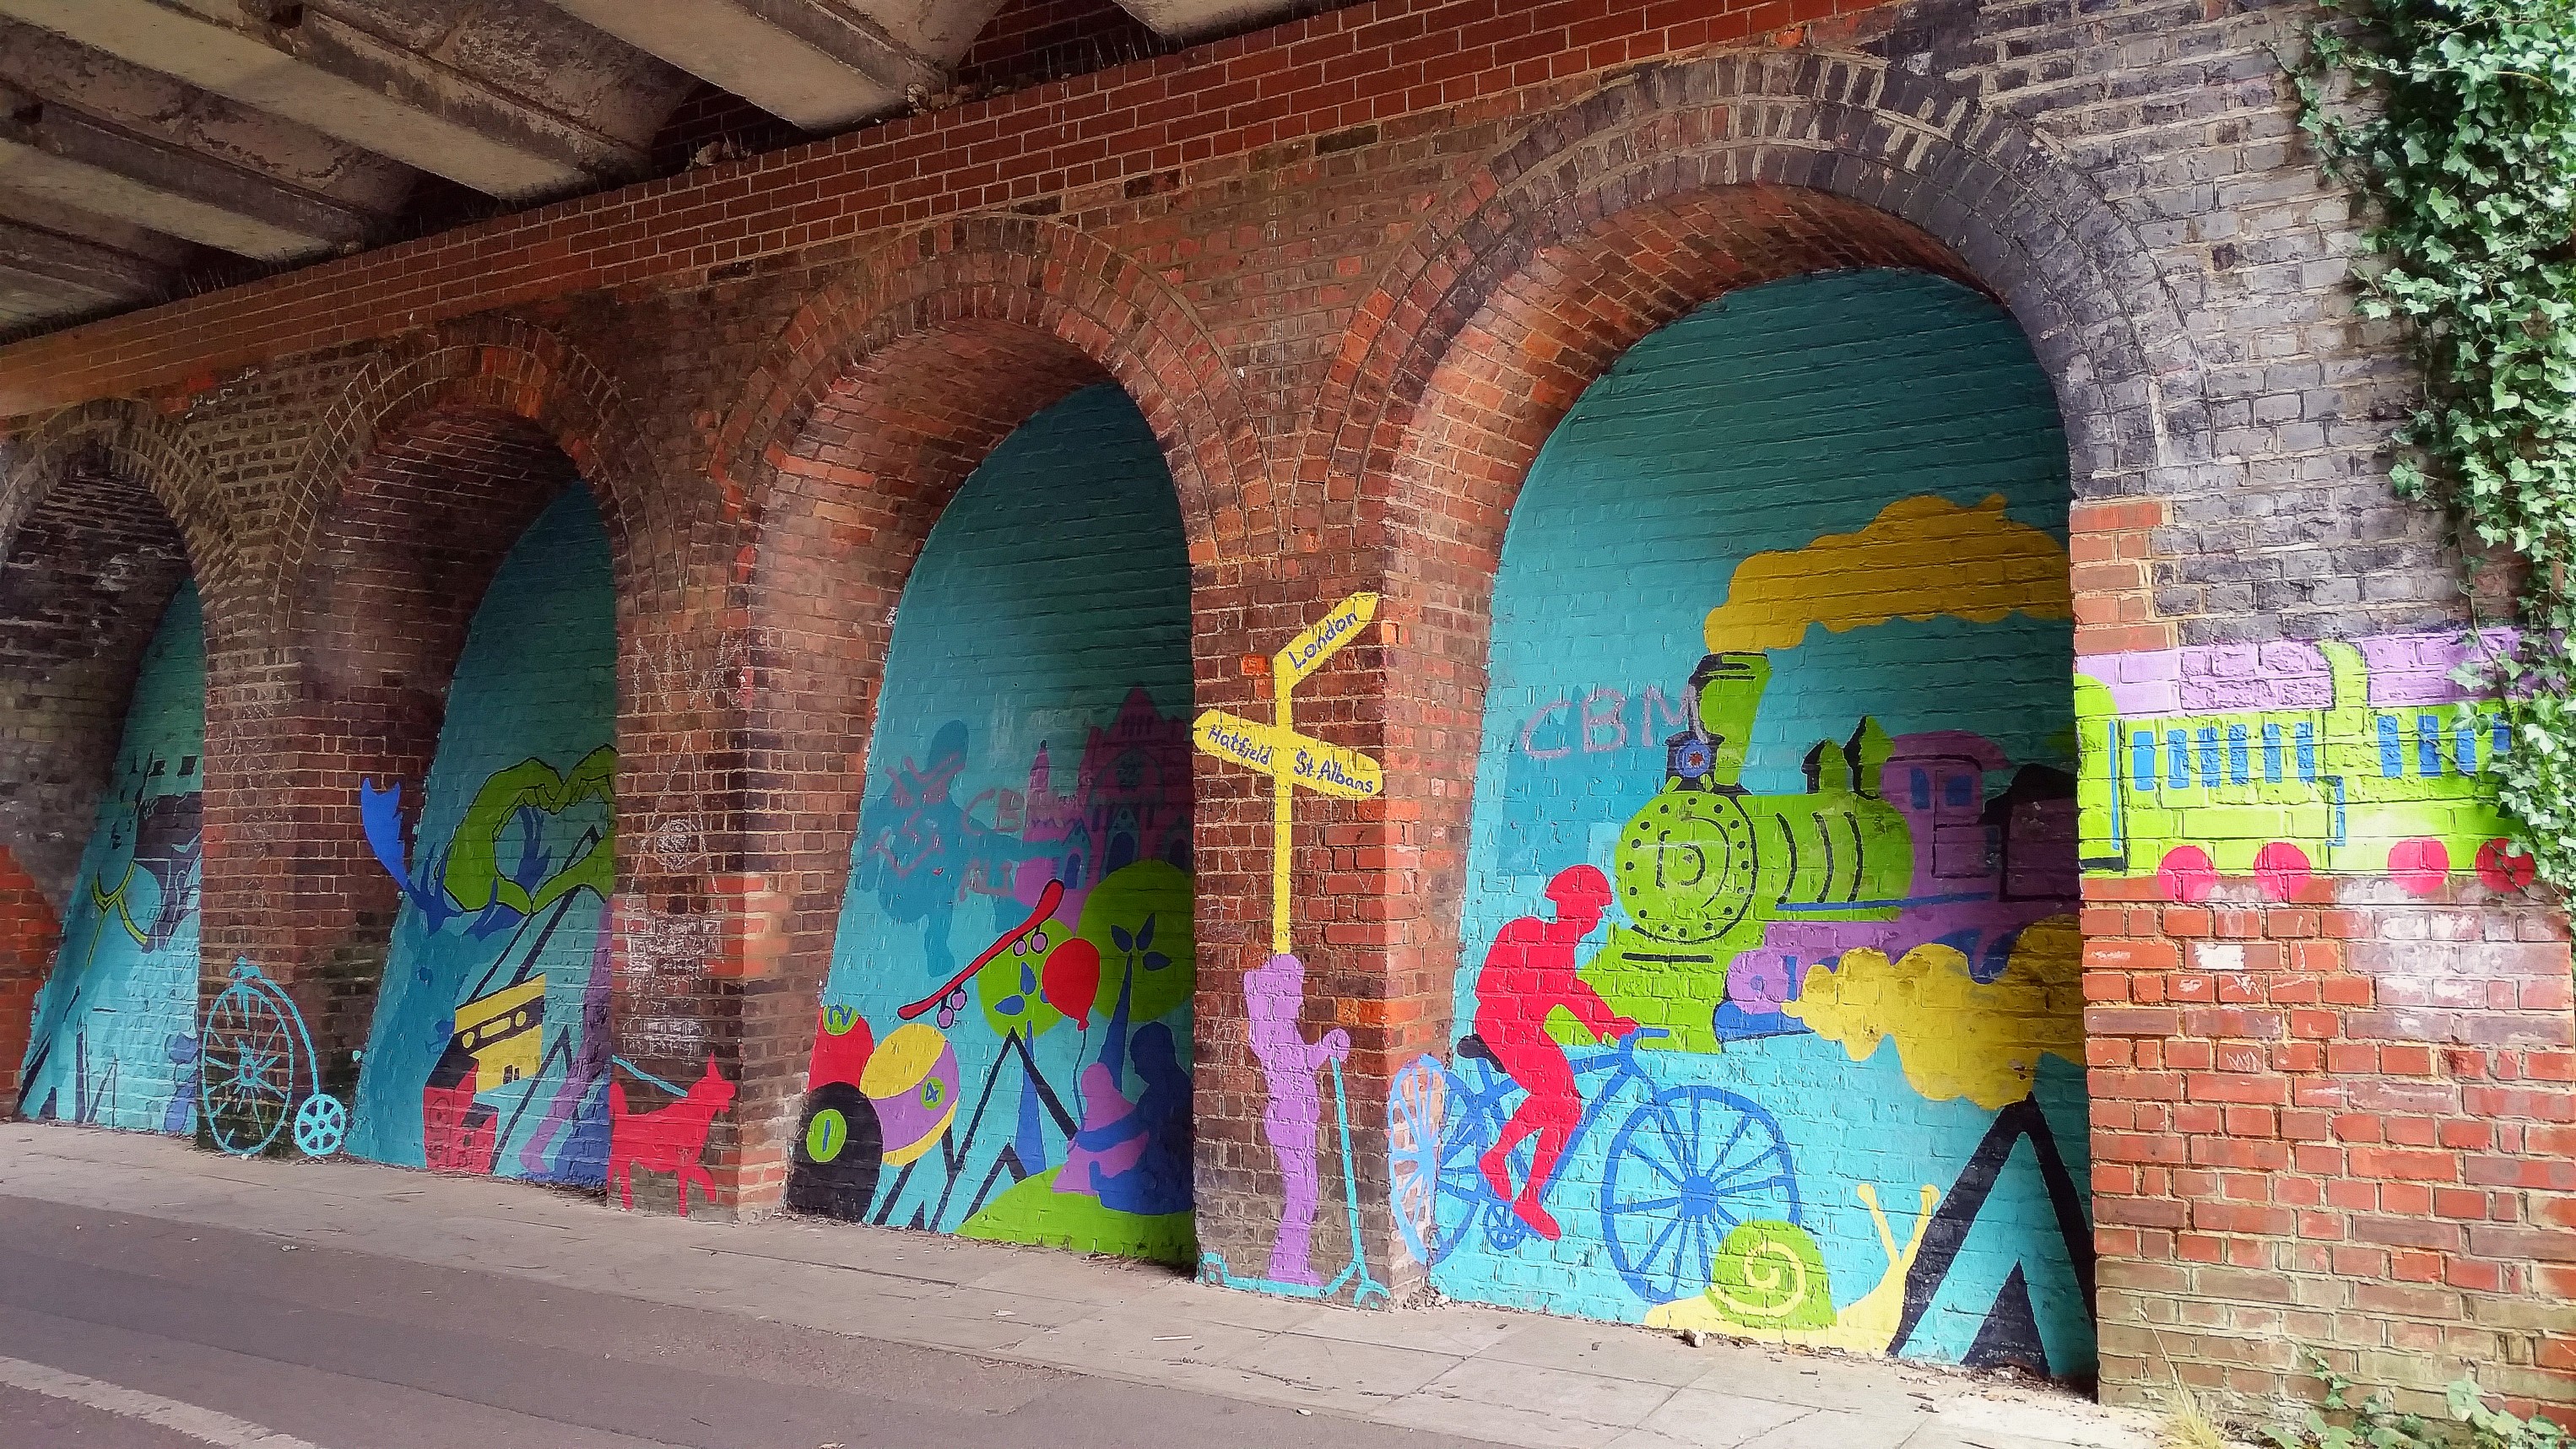 #cyclingadventures, InnTravel, slow holidays, cycling, cycle route, Alban Way, graffiti art, St Albans, Hertfordshire, active lifestyle, wellbeing, outdoors, get outside